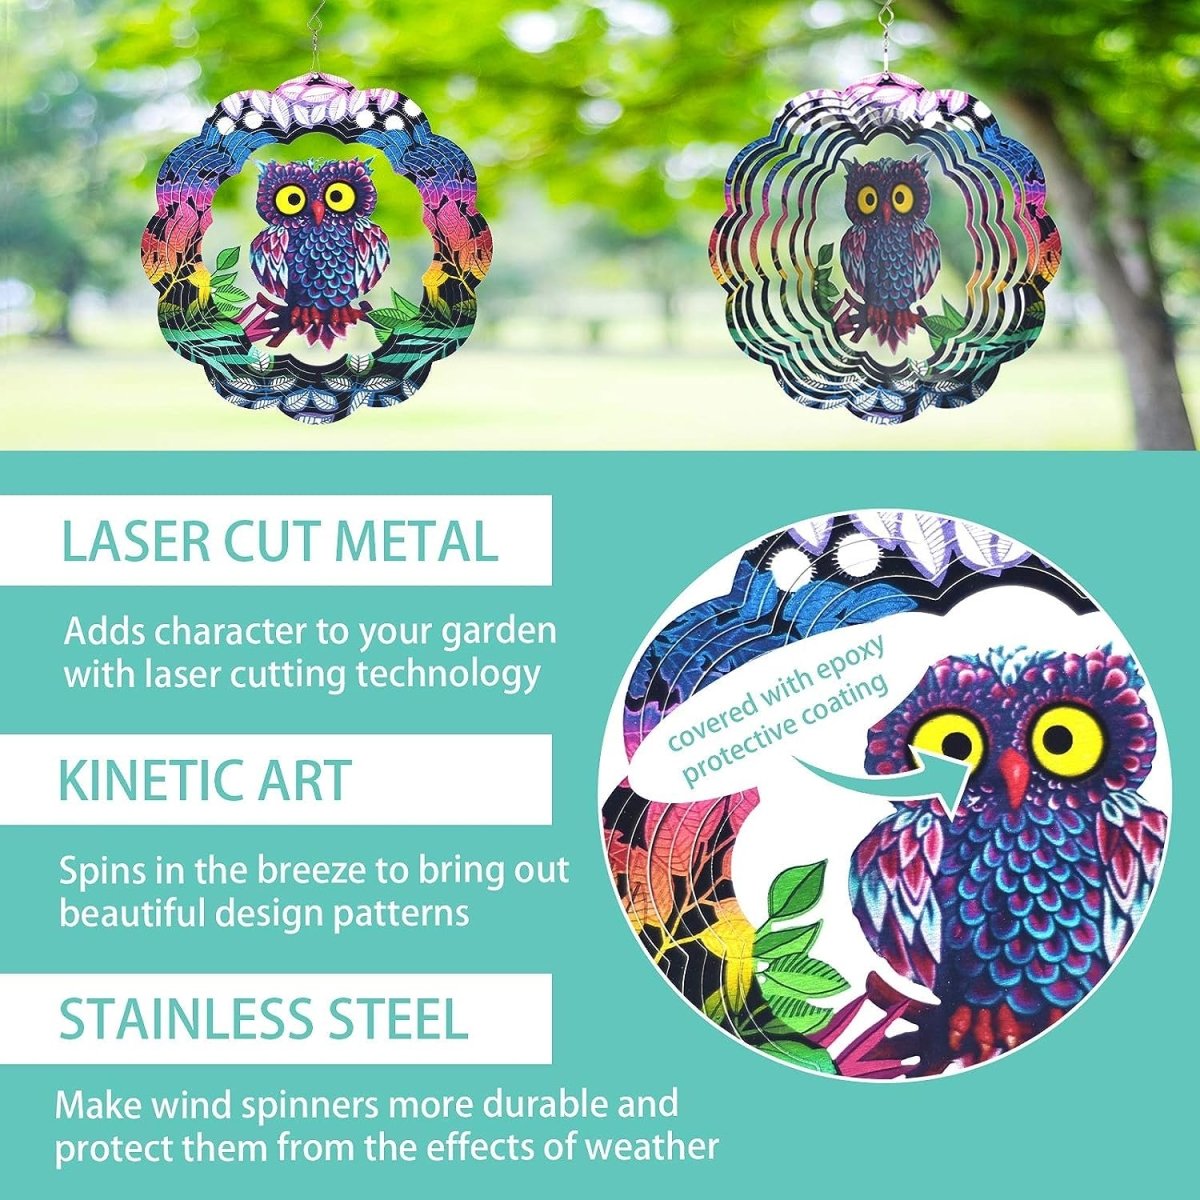 3D Hanging Wind Spinner for Outdoor Decorations- Owl Wind Spinner- #Royalkart#3d wall hanging